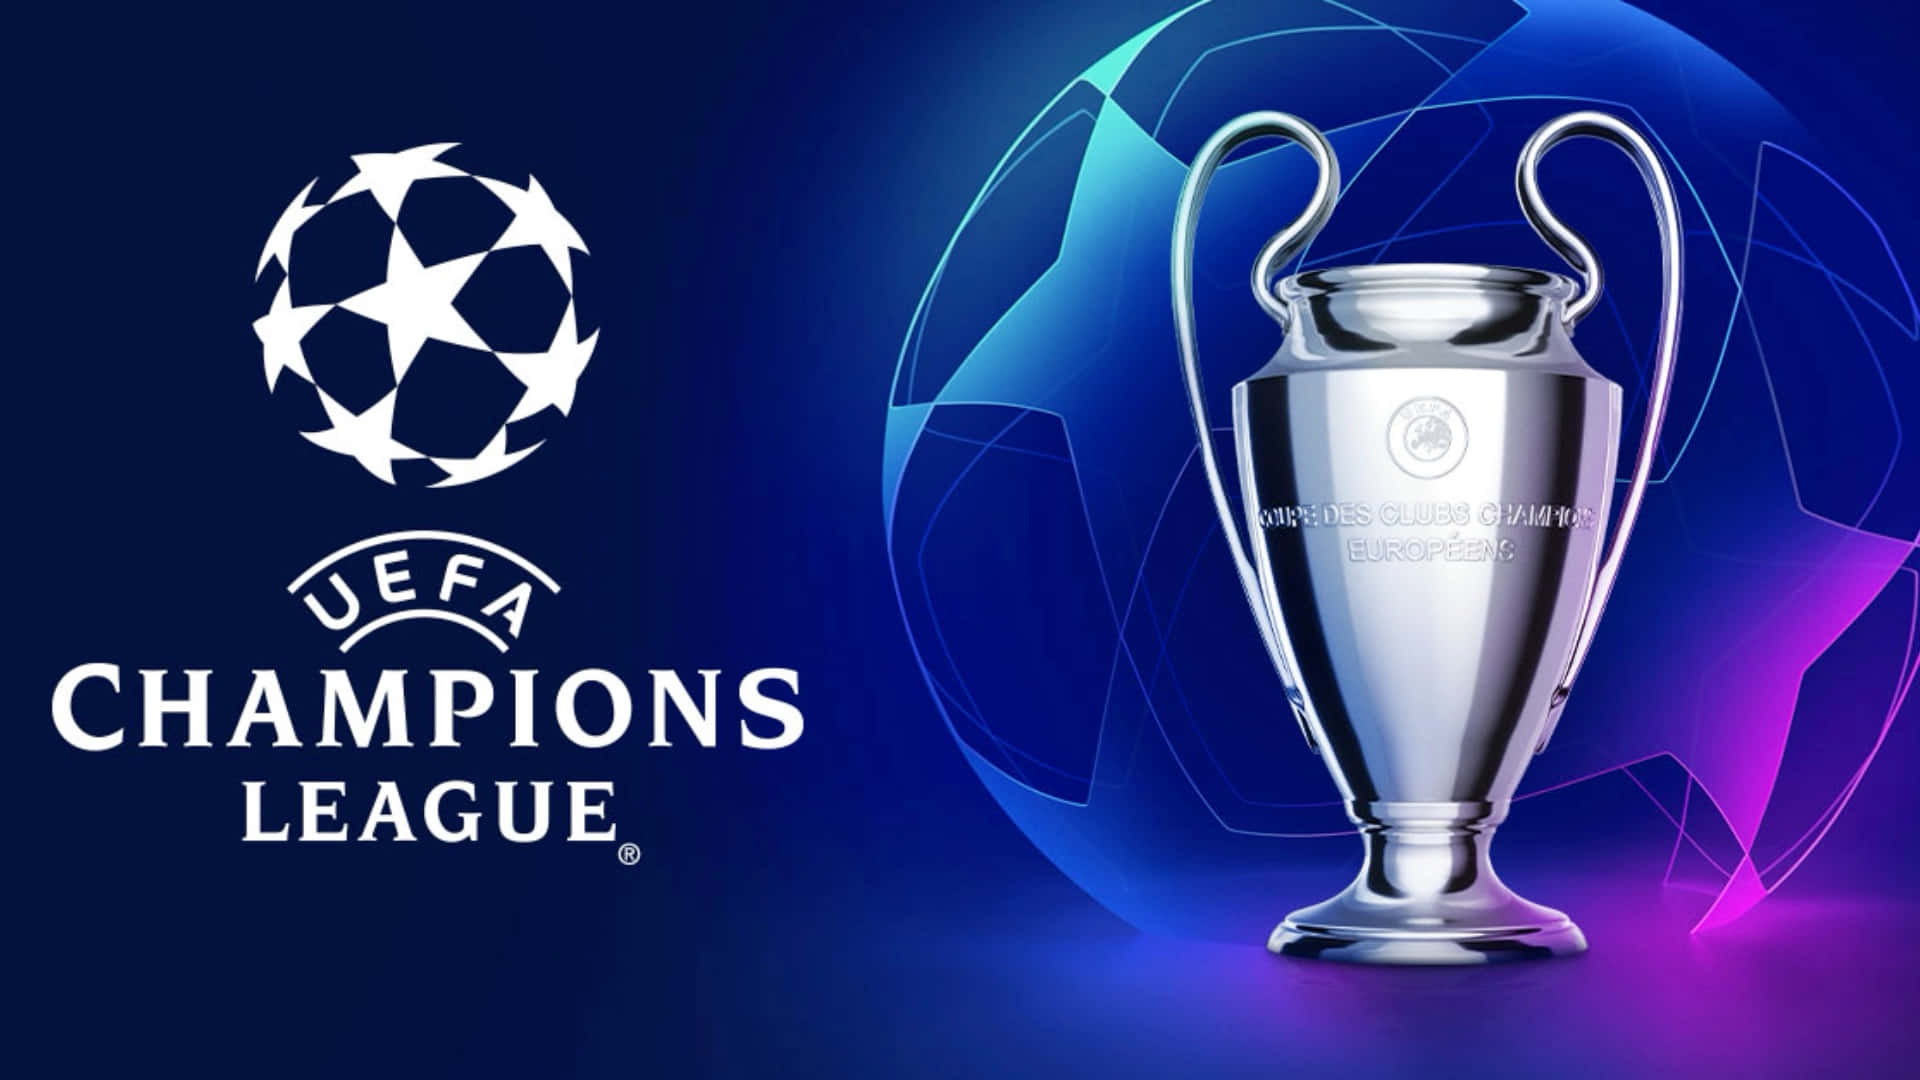 Celebrating teams from across Europe compete against each other for the ultimate prize in the UEFA Champions League